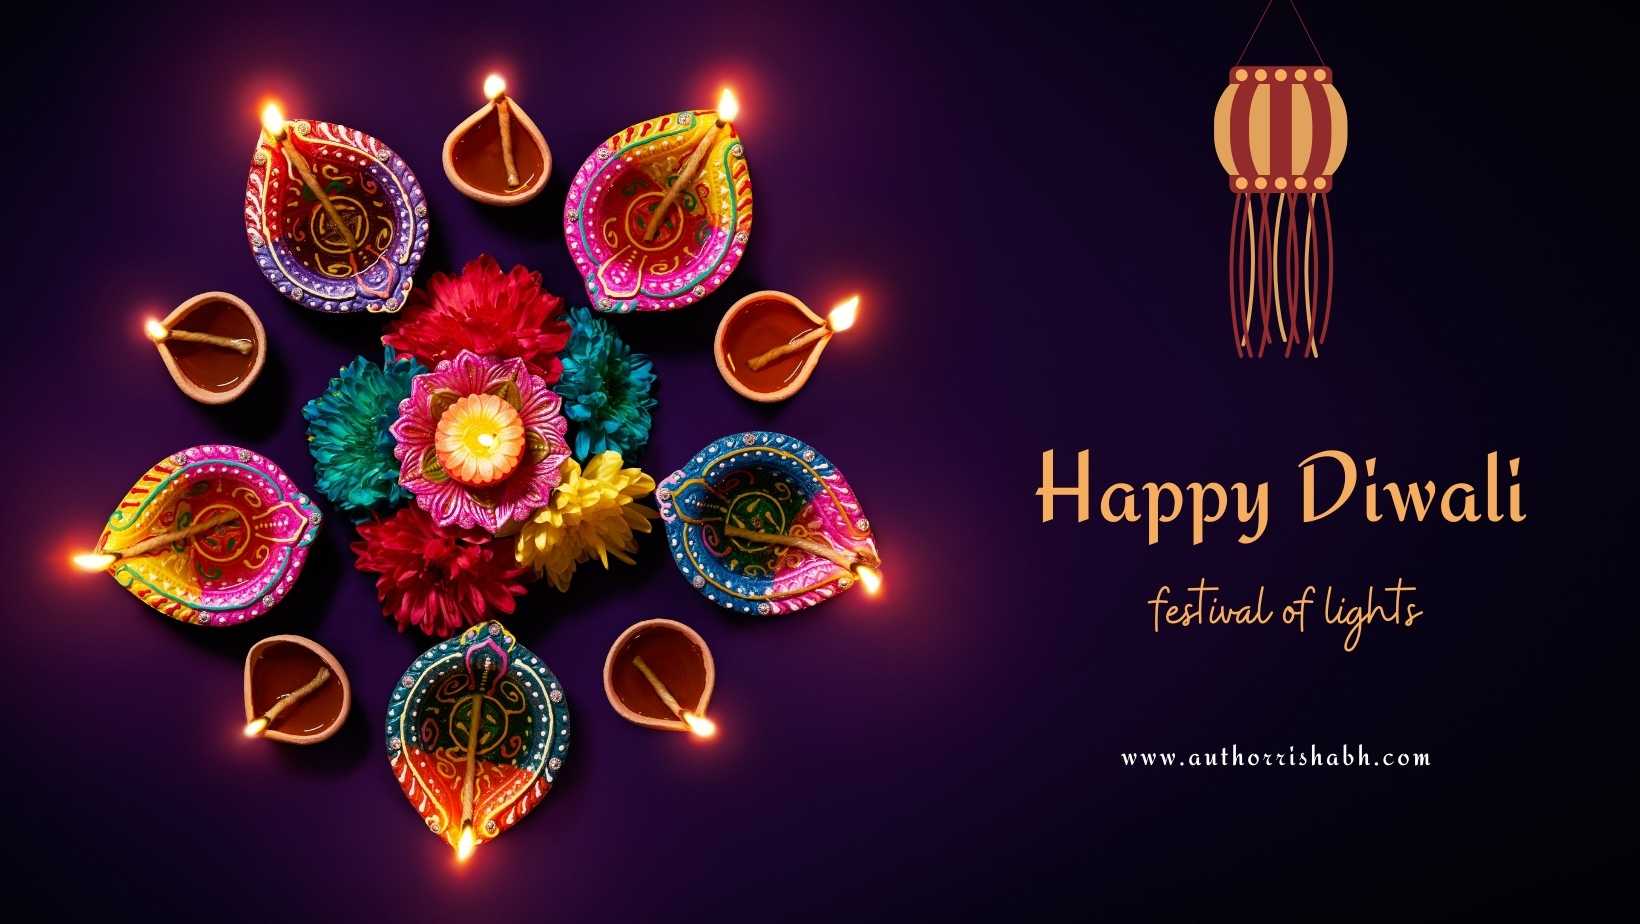 Happy Diwali wishes for friends and family | Diwali wish messages ...